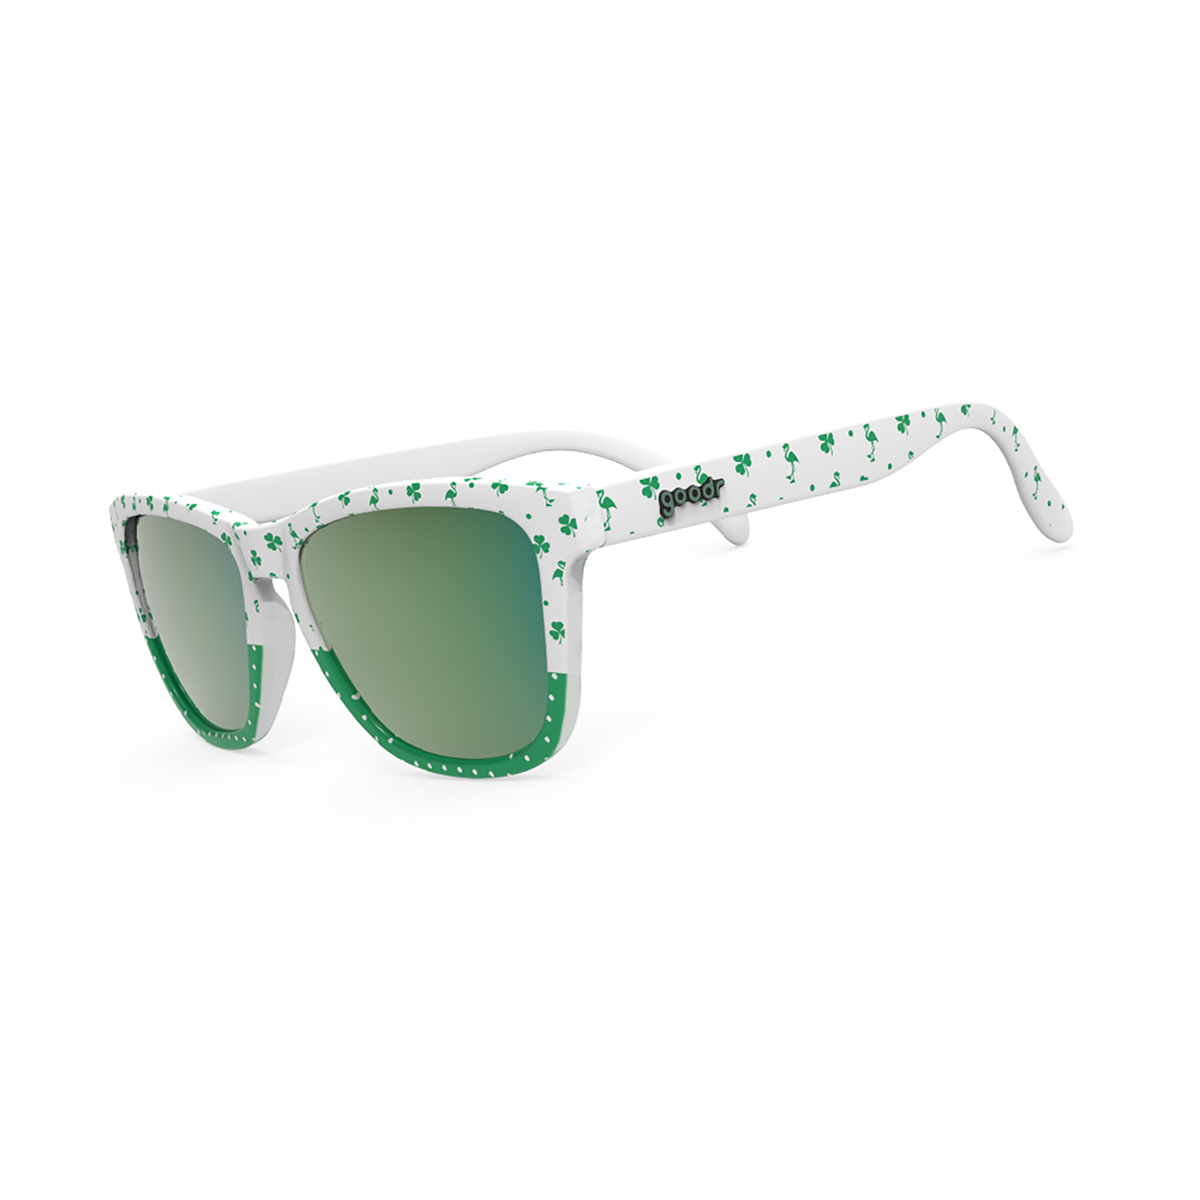 Goodr St. Patrick's Limited Edition Sunglasses, , large image number null